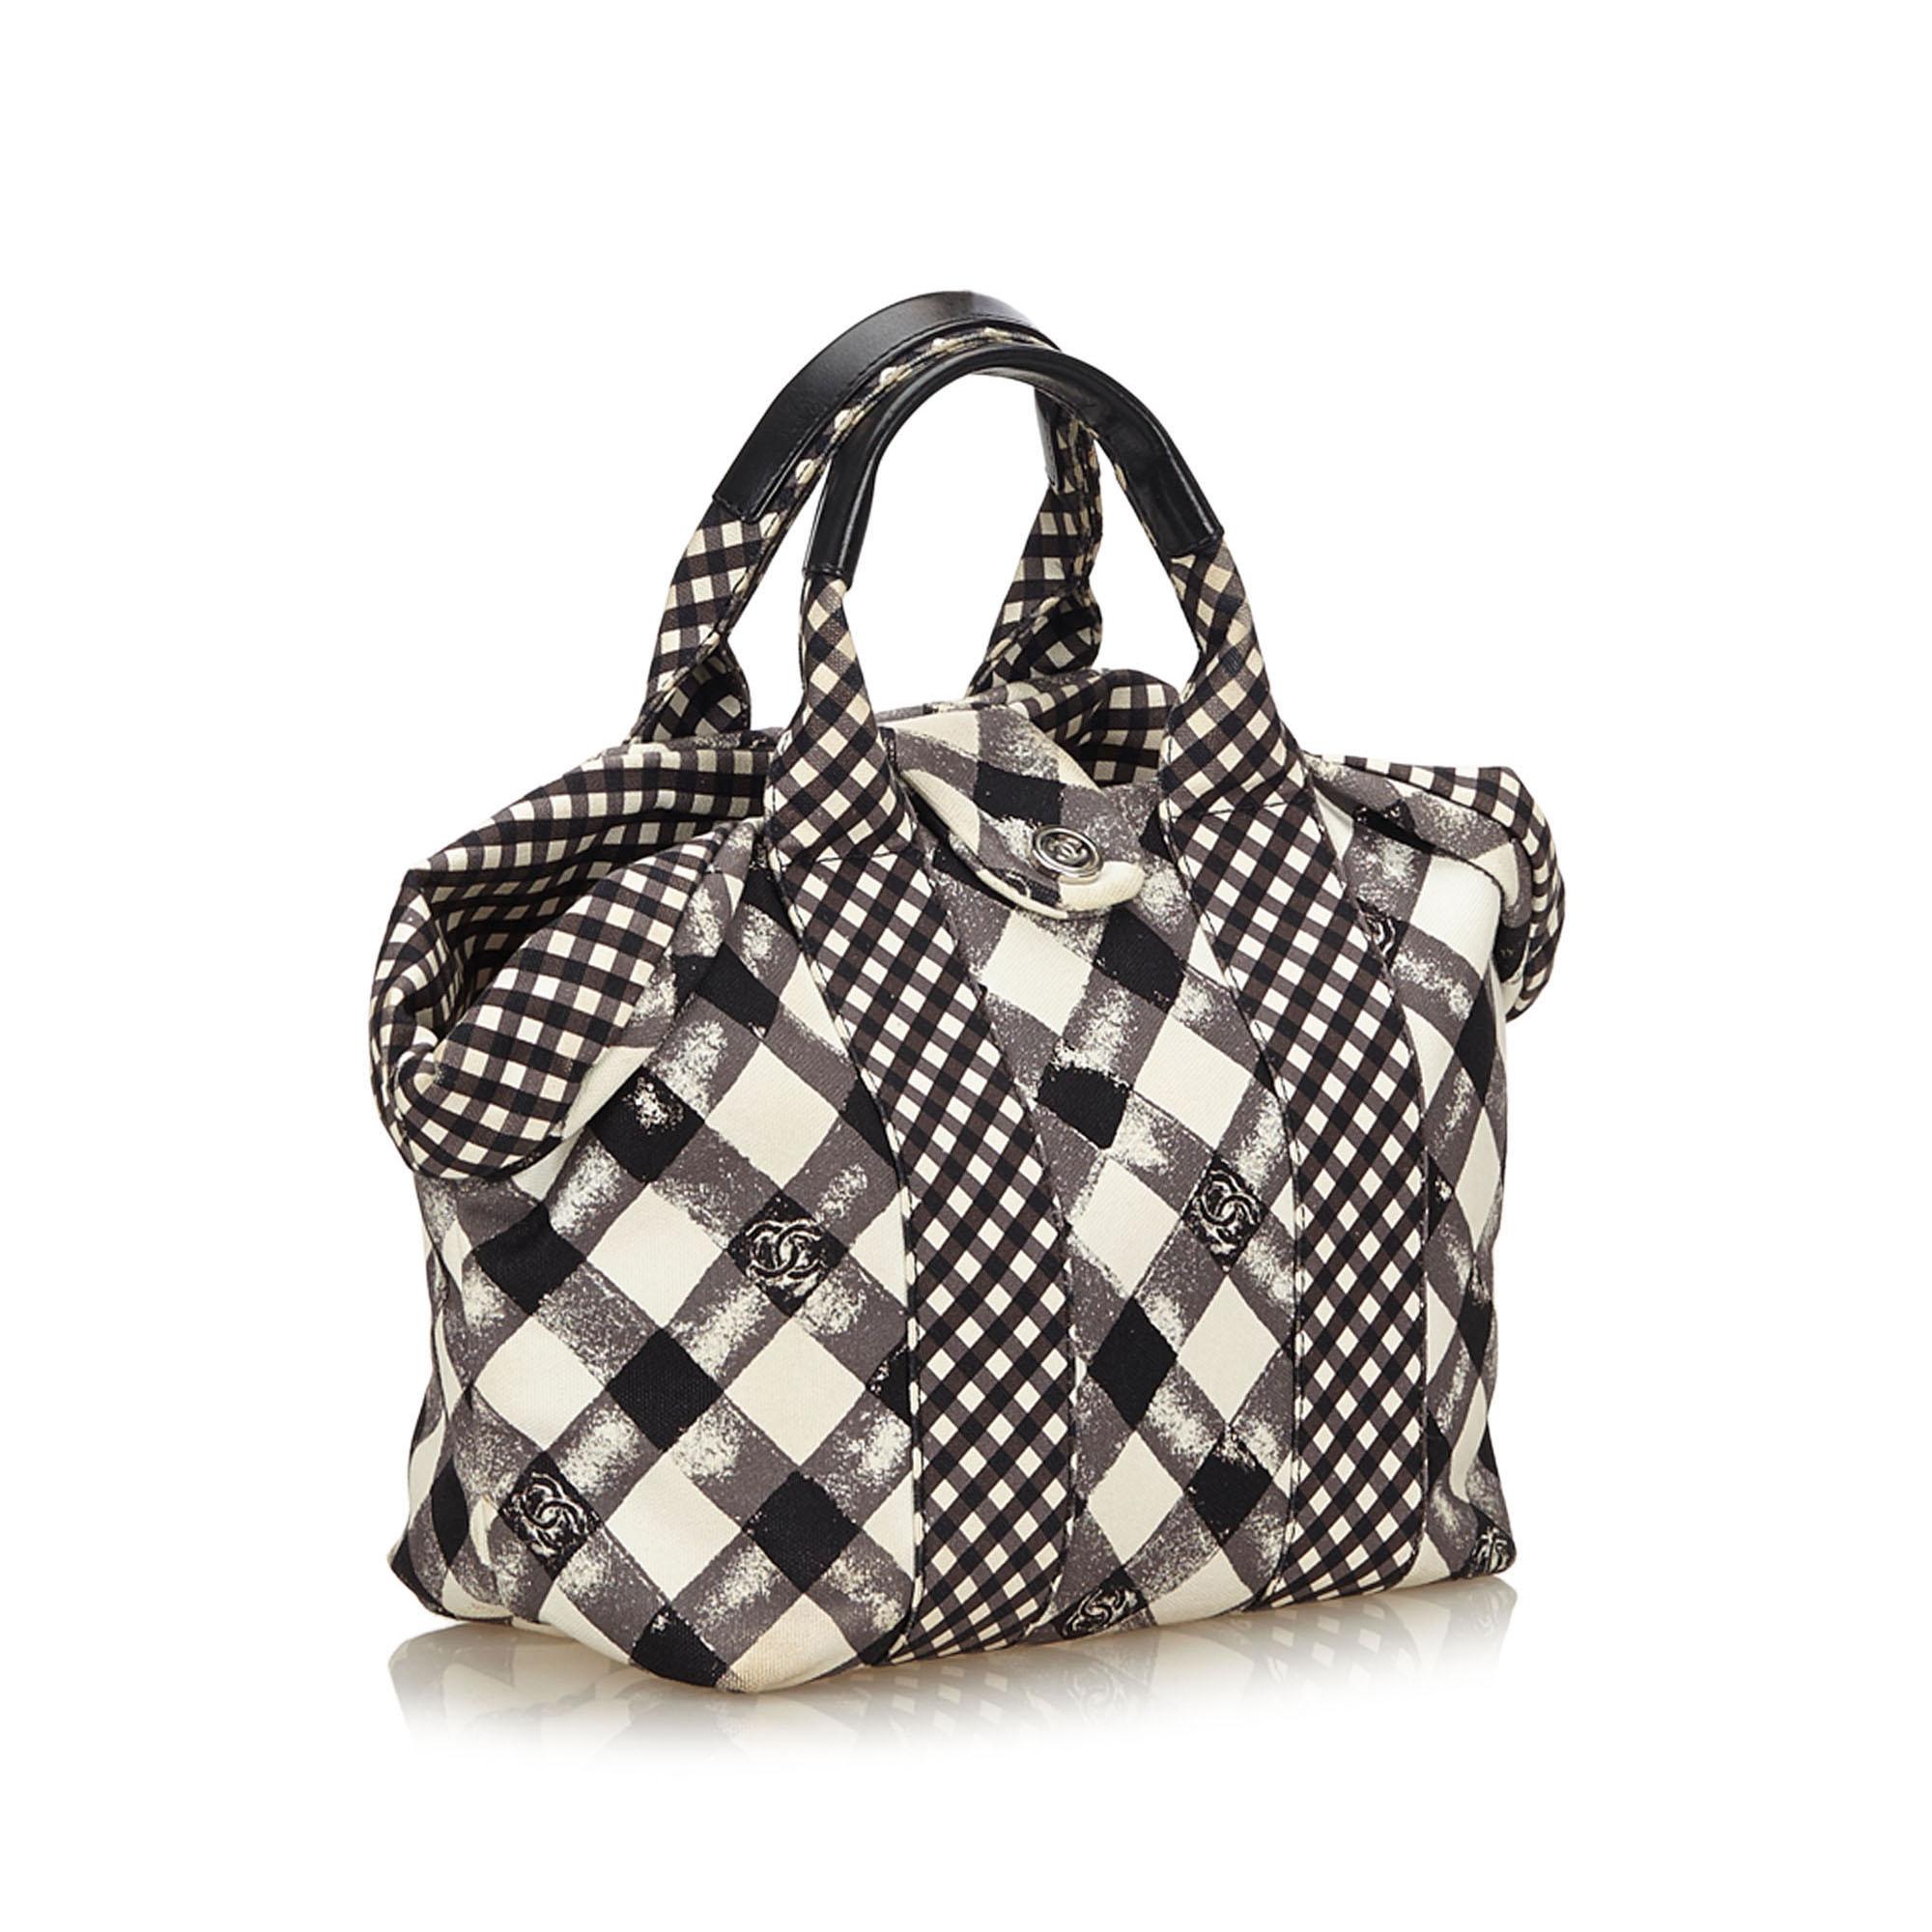 This tote bag features a gingham canvas body, rolled leather handles, open top, and interior zip and open pockets. It carries as B+ condition rating.

Inclusions: 
Dust Bag

Dimensions:
Length: 23.00 cm
Width: 21.00 cm
Depth: 13.00 cm
Hand Drop: